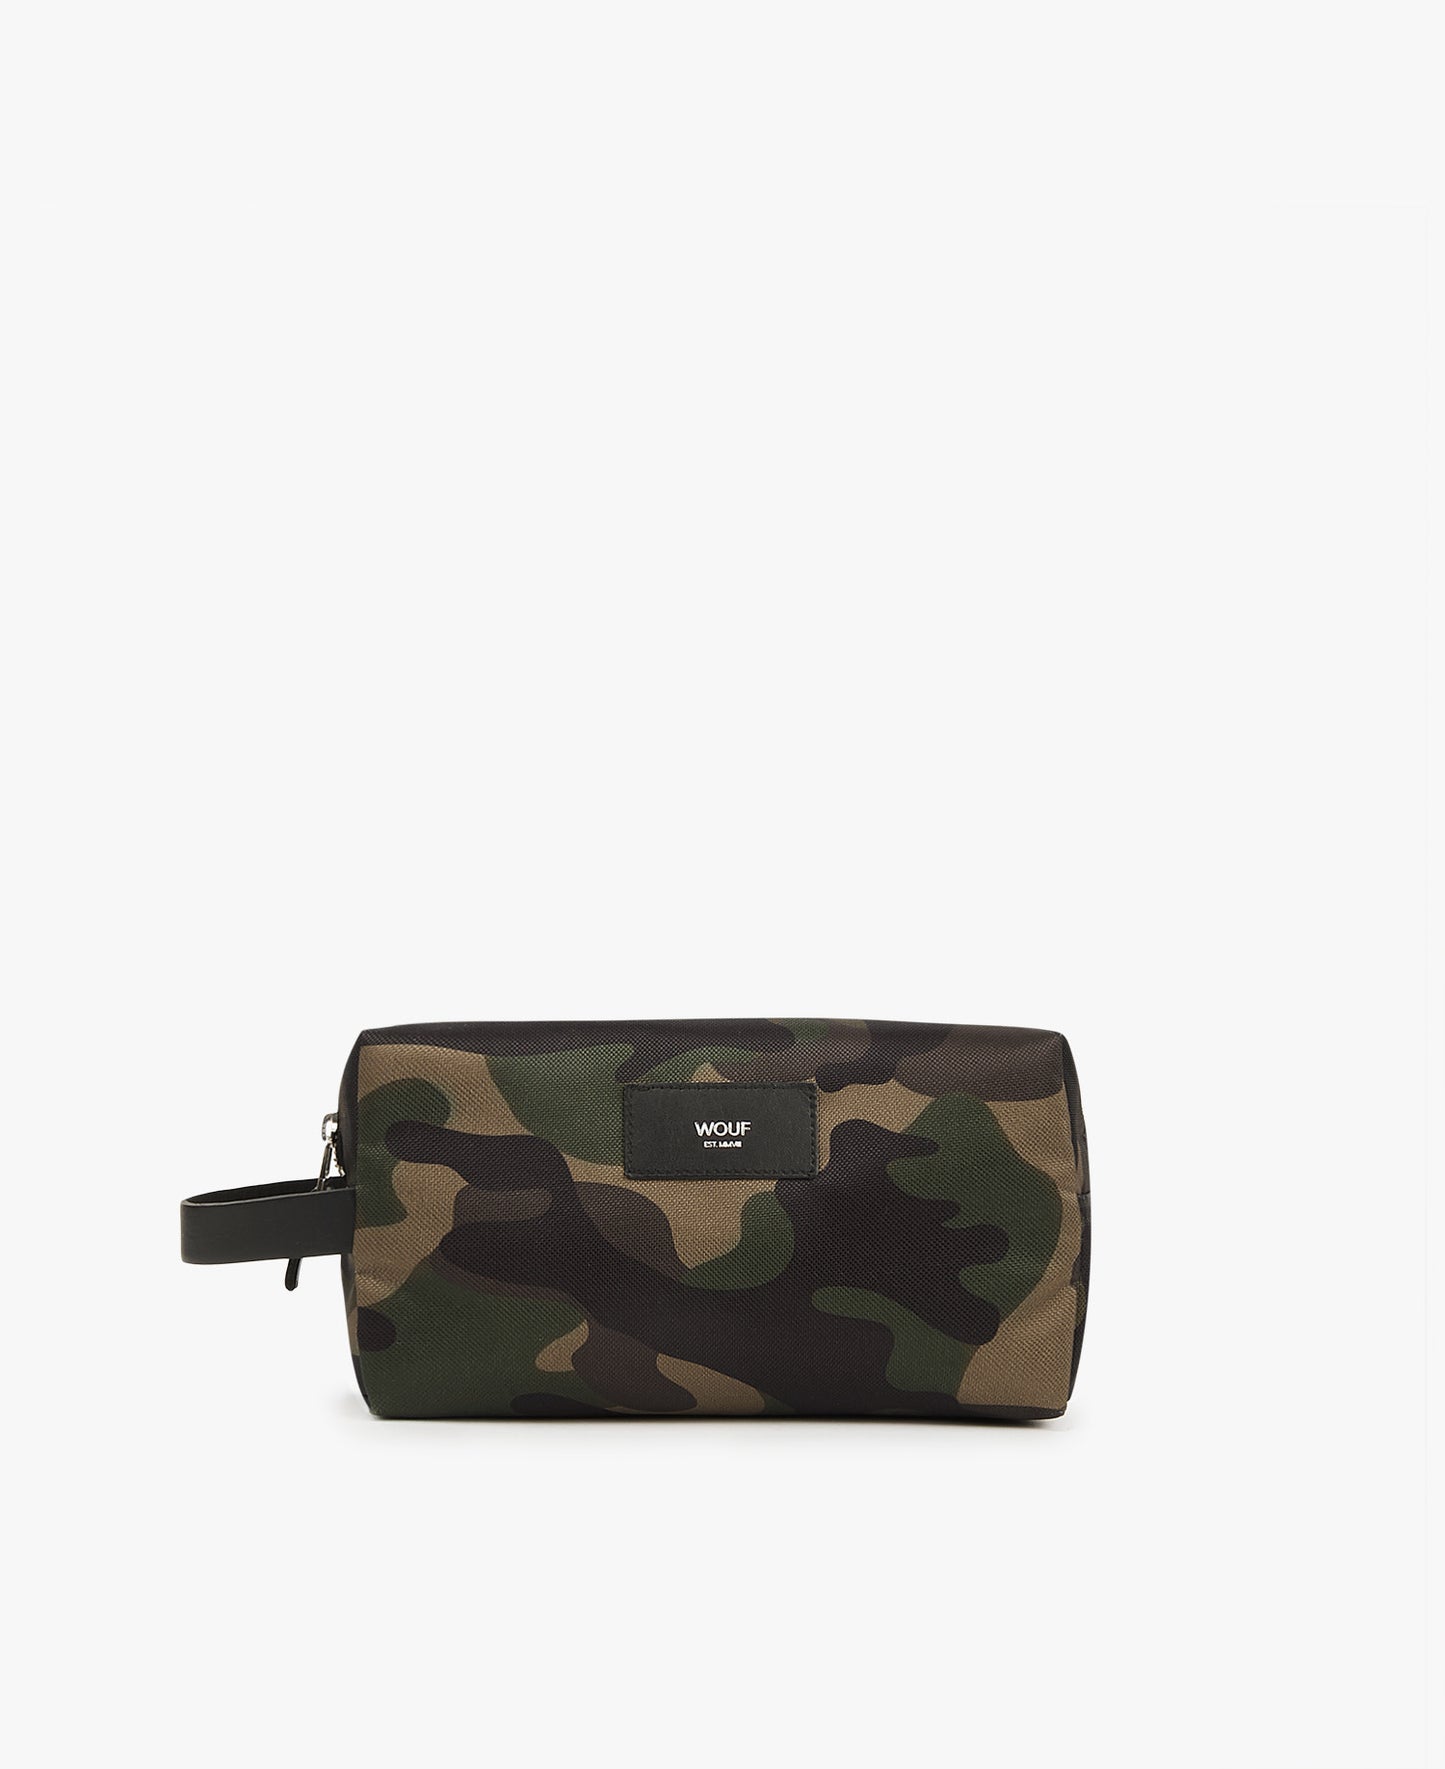 WOUF Camouflage Travel Case